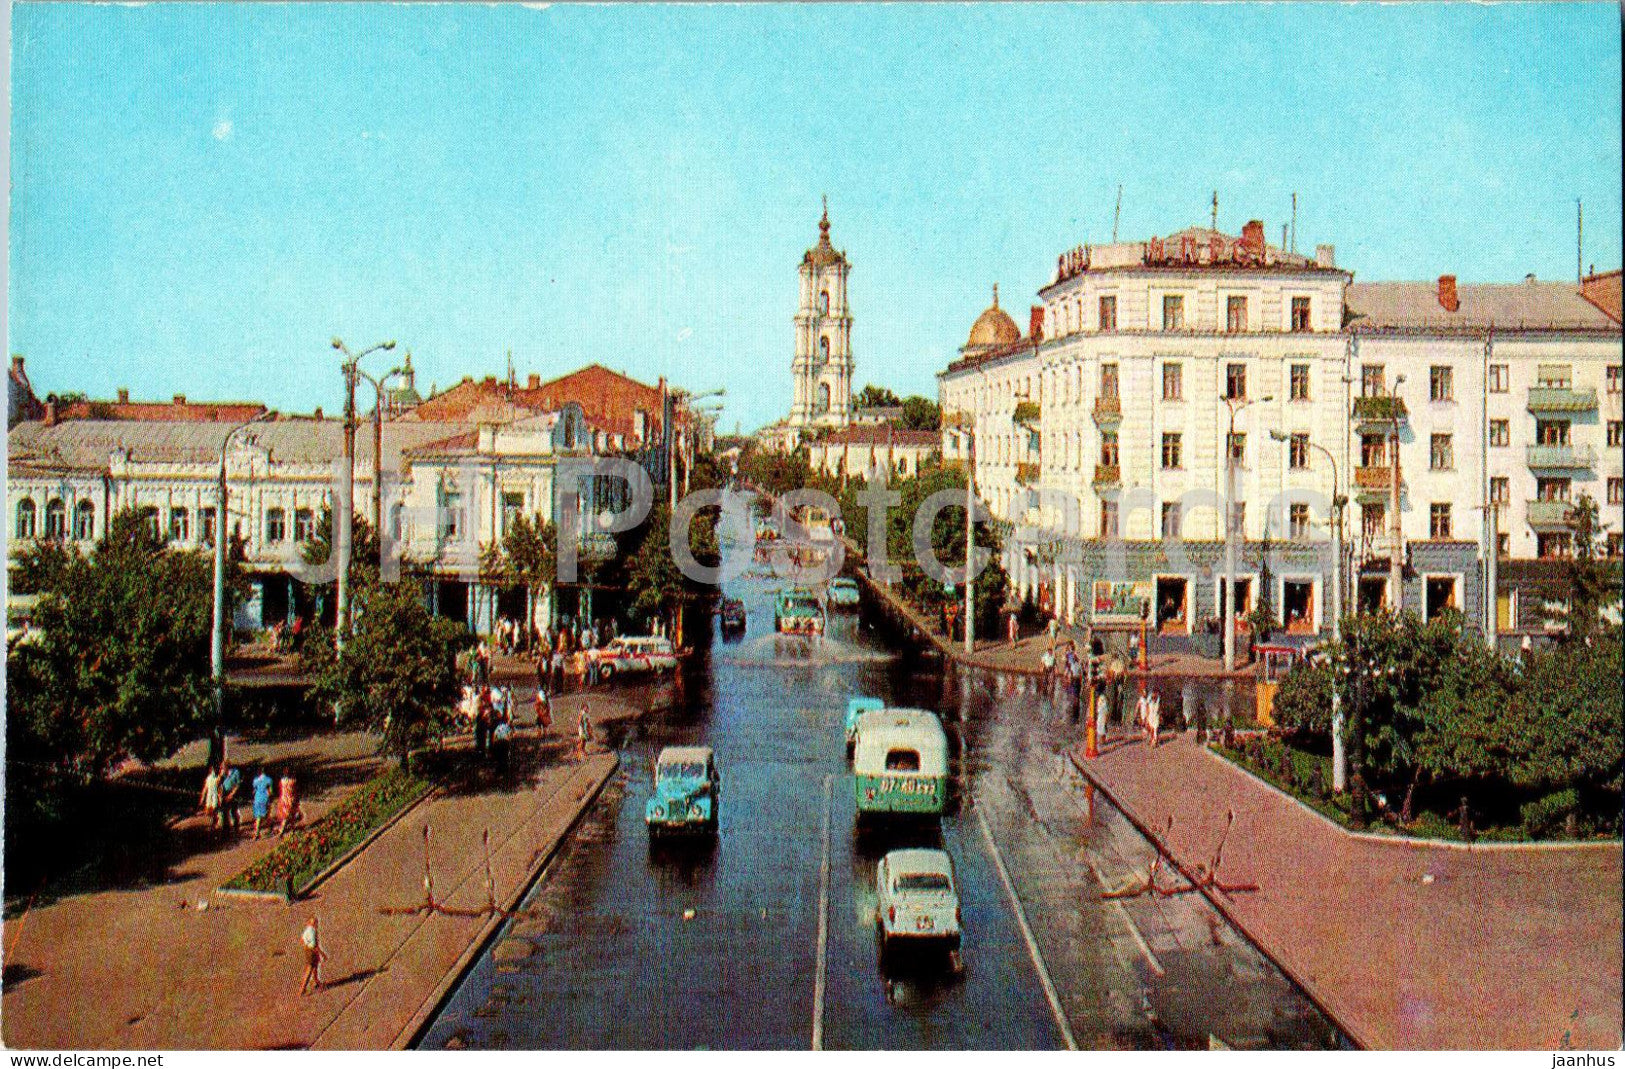 Sumy - view at the Red square and Lenin street - 1976 - Ukraine USSR - unused - JH Postcards